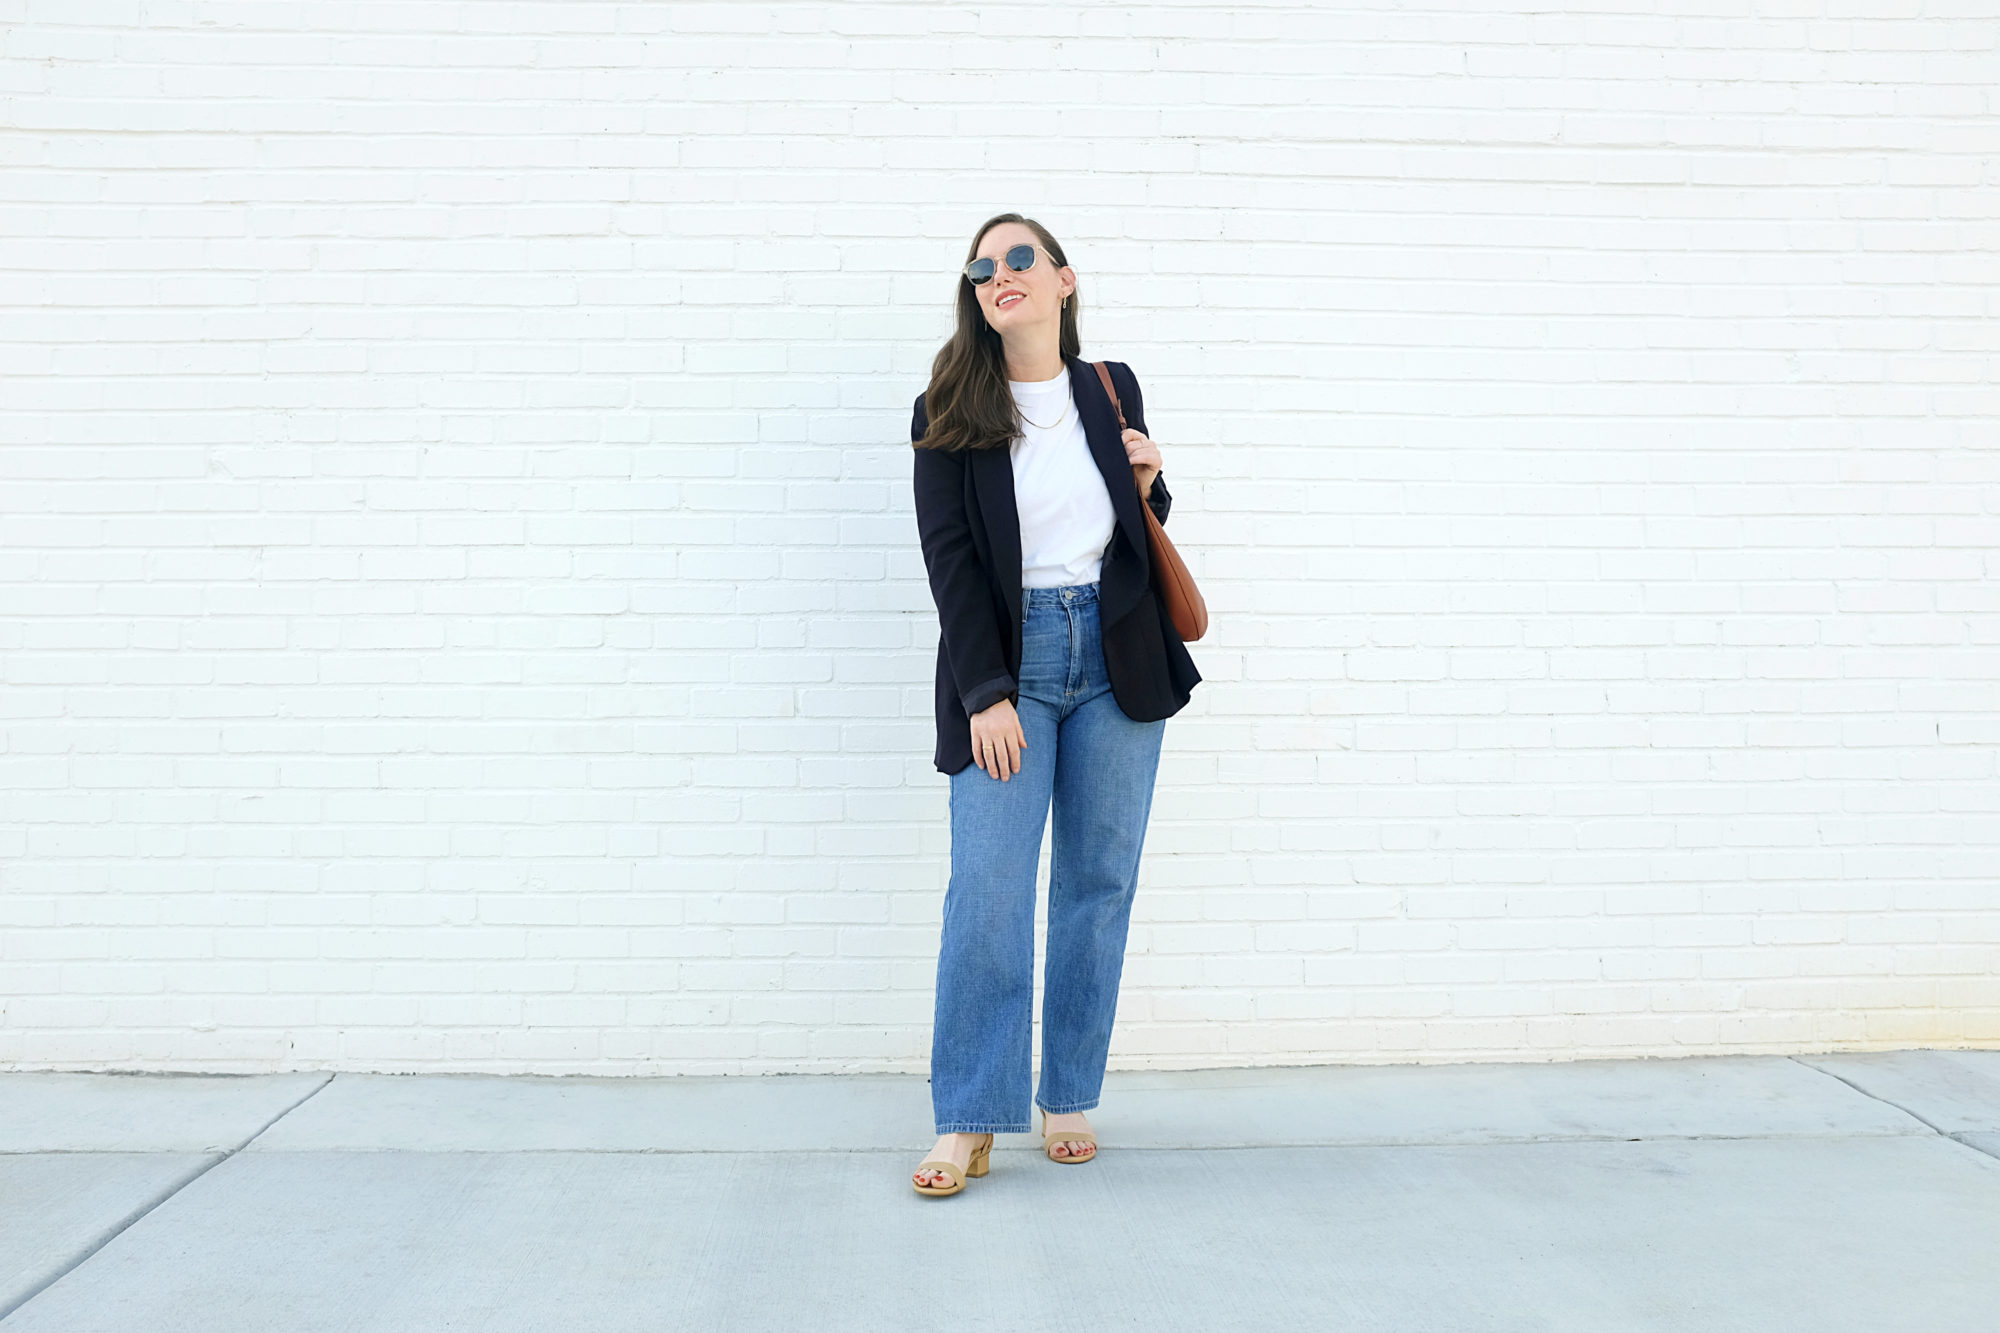 Alyssa wears the Perfect Block Sandal from Sarah Flint in front of a white brick wall